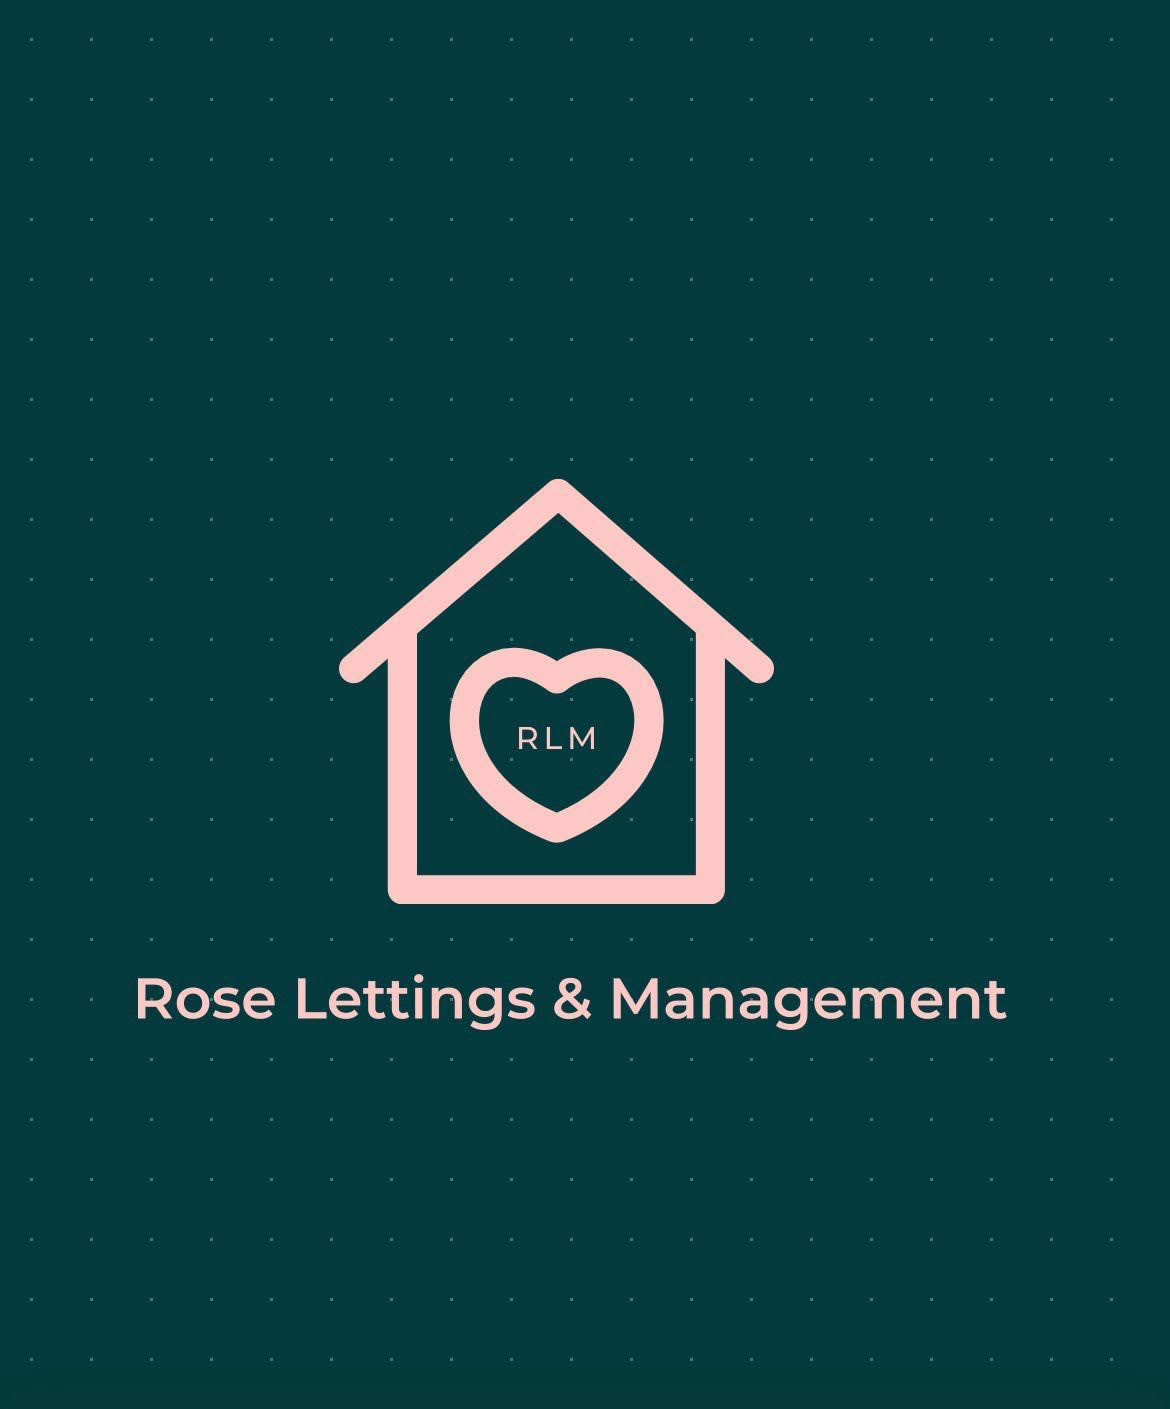 Logo for landlord Rose lettings and management